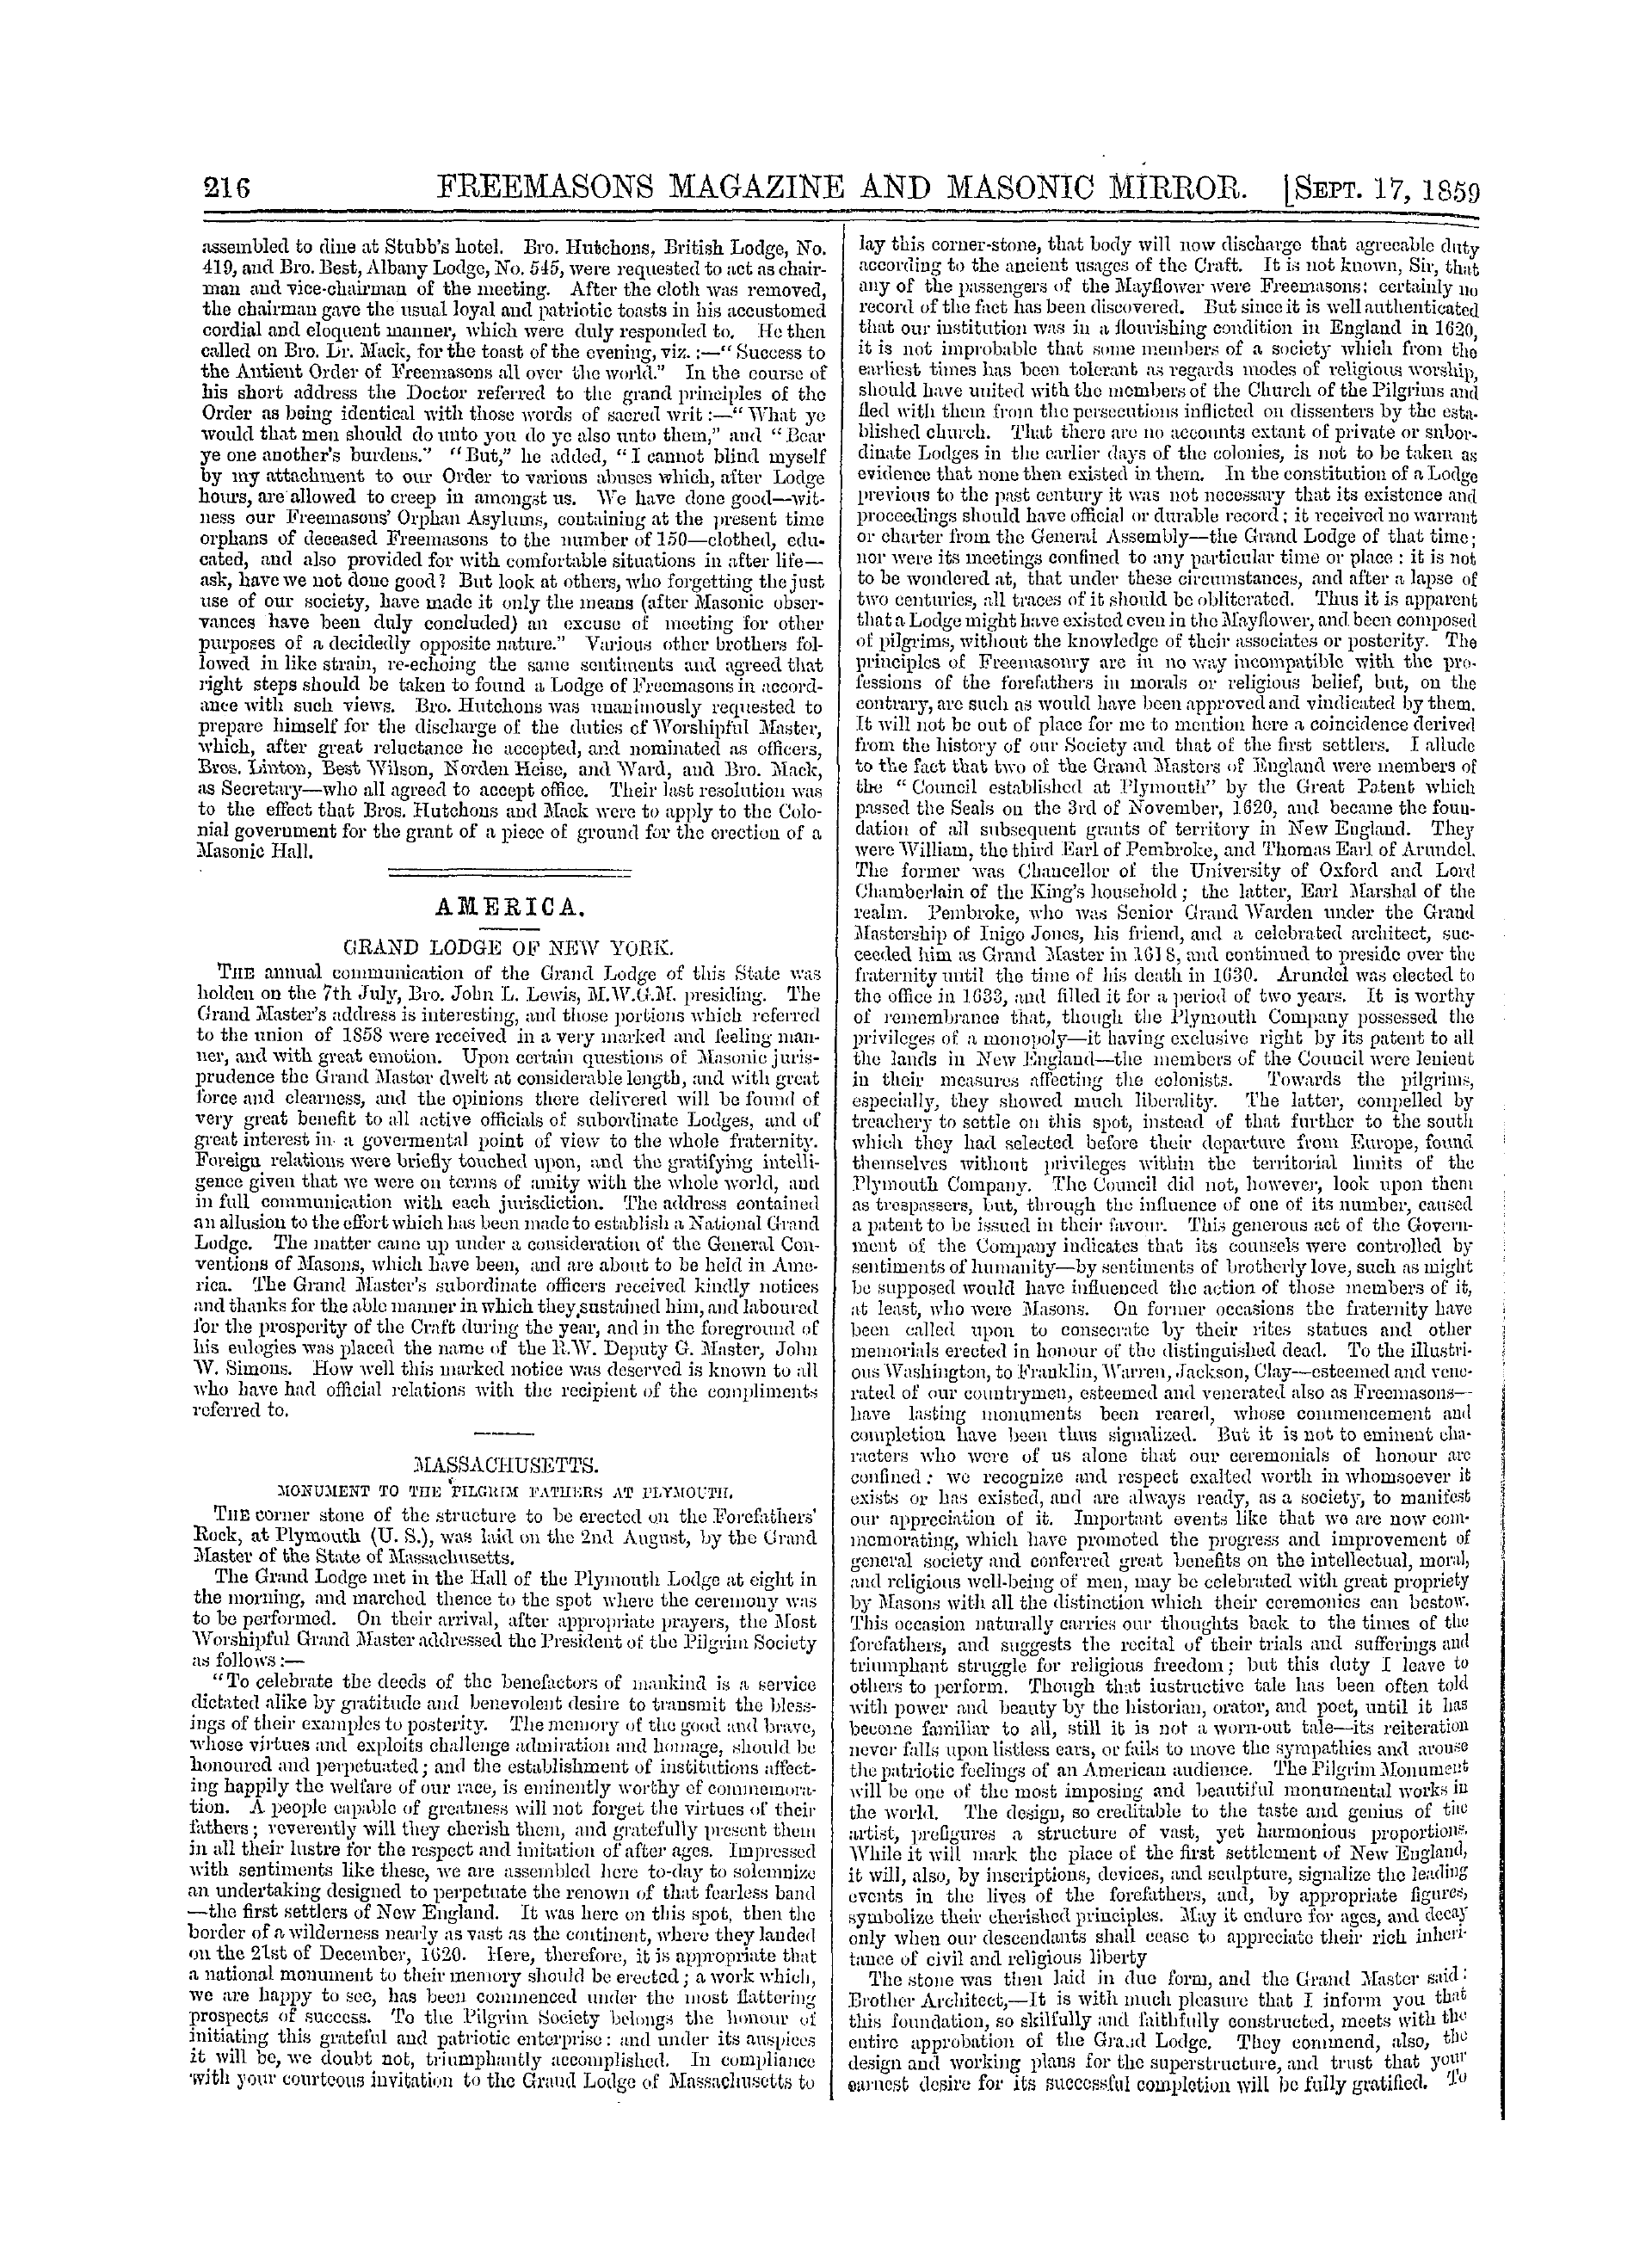 Page 16